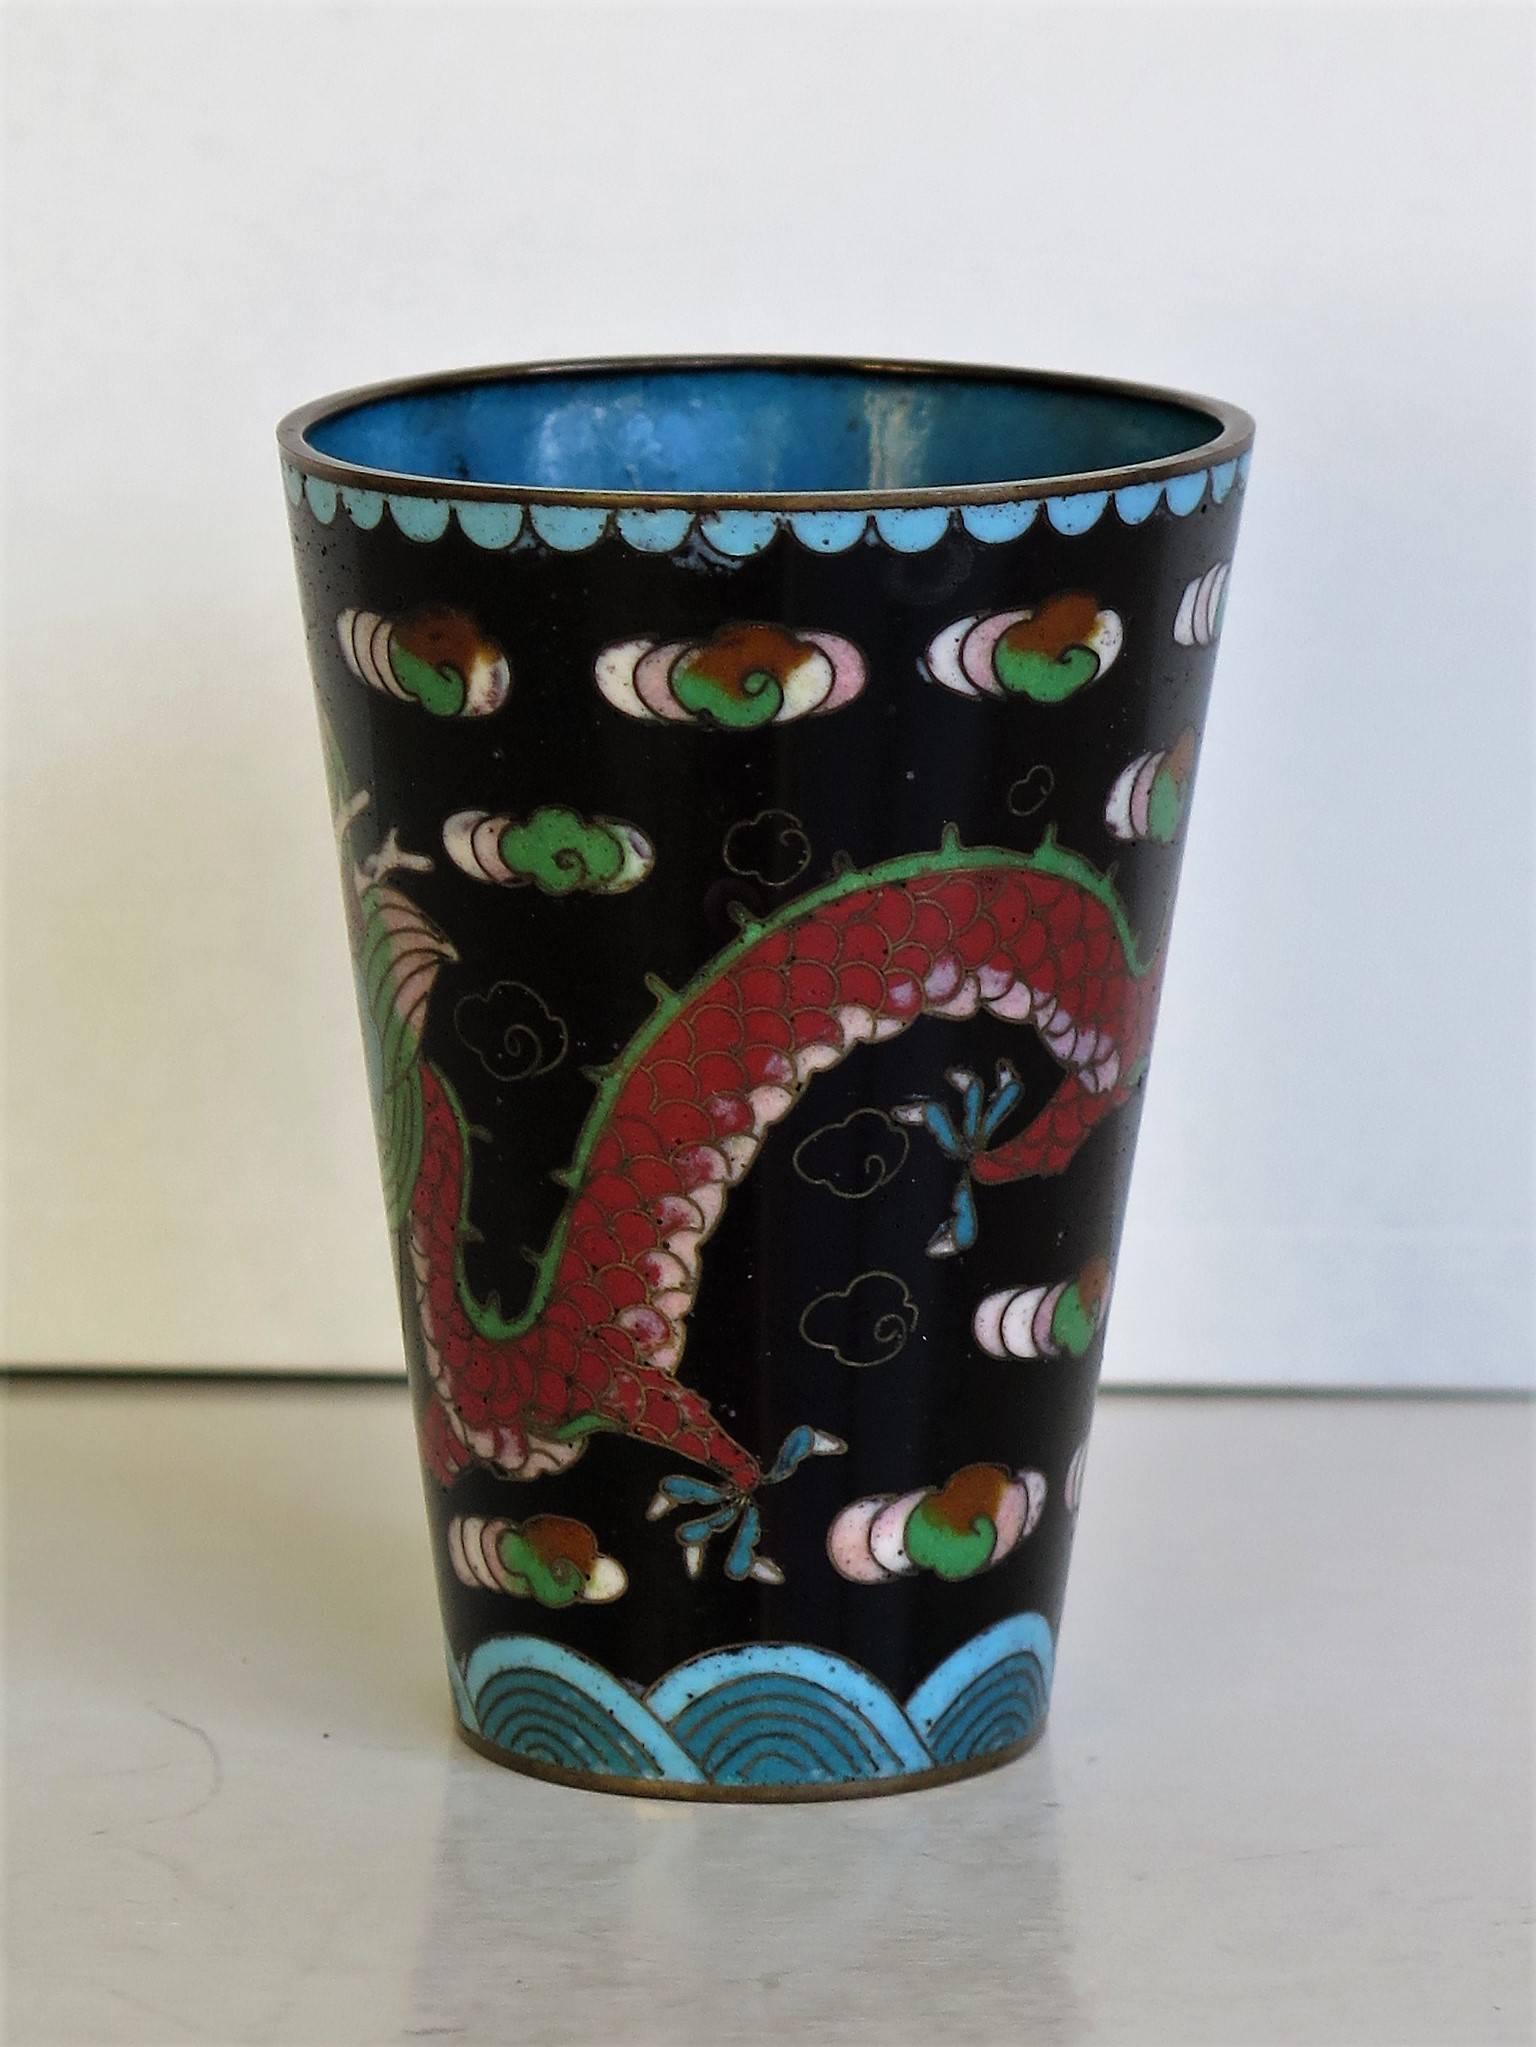 This is a very attractive Chinese Cloisonné beaker that we date to the early 20th century of the late Qing dynasty.

The beaker has a good tactile tapered shape.

The decoration shows a mythical four clawed dragon chasing a flaming pearl through